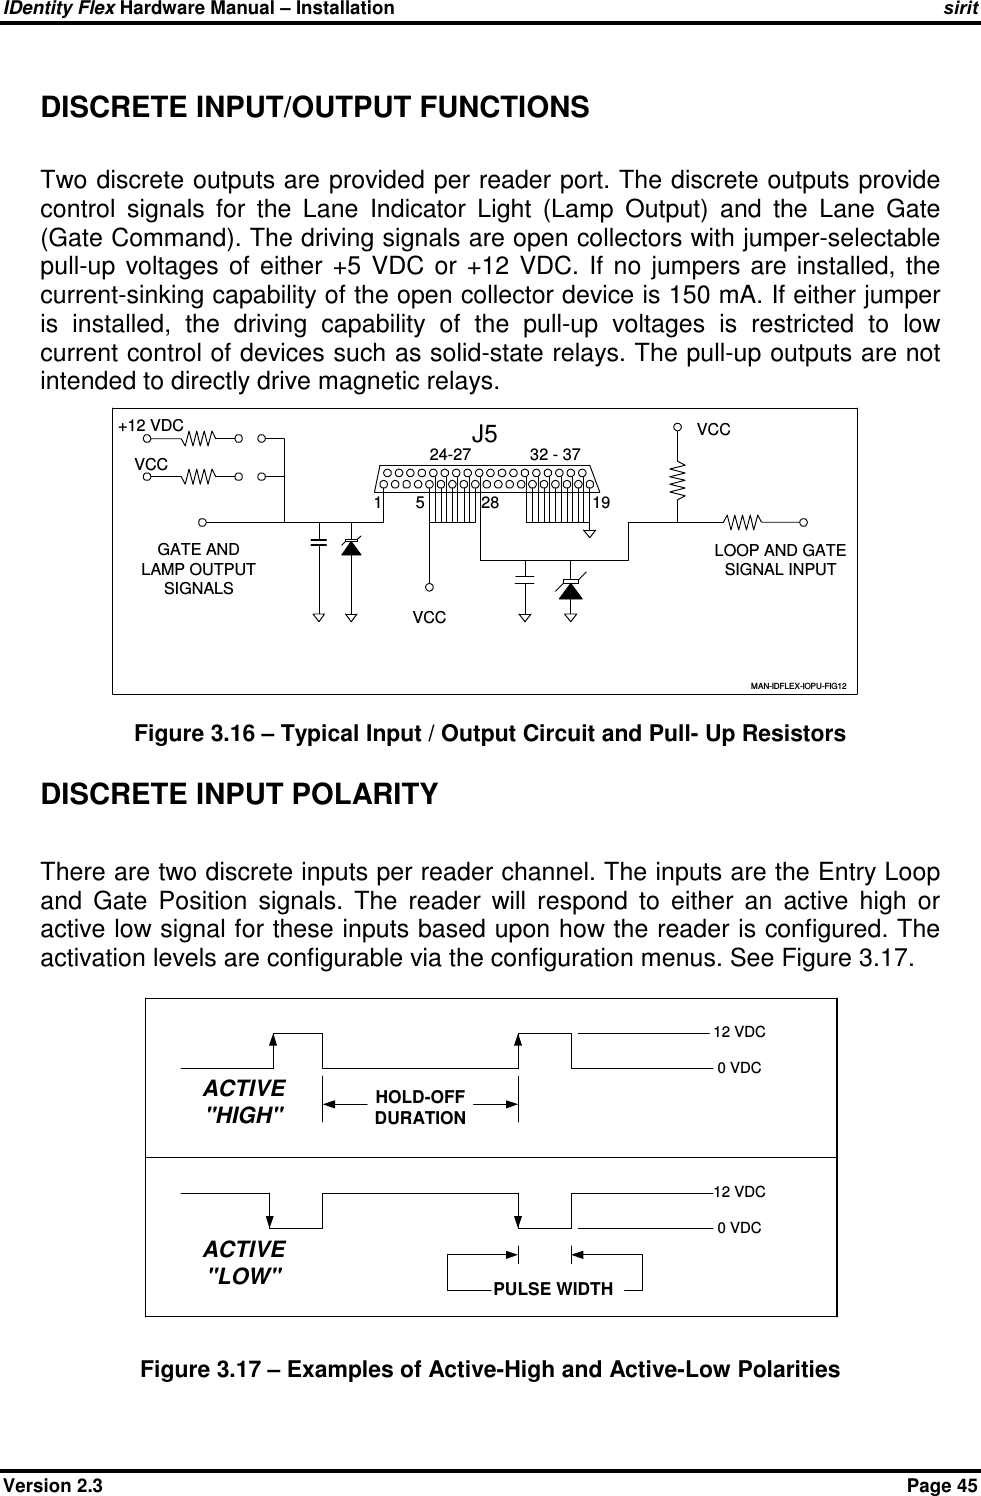 IDentity Flex Hardware Manual – Installation   sirit Version 2.3    Page 45 DISCRETE INPUT/OUTPUT FUNCTIONS  Two discrete outputs are provided per reader port. The discrete outputs provide control  signals  for  the  Lane  Indicator  Light  (Lamp  Output)  and  the  Lane  Gate (Gate Command). The driving signals are open collectors with jumper-selectable pull-up  voltages  of  either  +5  VDC  or  +12  VDC.  If  no  jumpers  are  installed,  the current-sinking capability of the open collector device is 150 mA. If either jumper is  installed,  the  driving  capability  of  the  pull-up  voltages  is  restricted  to  low current control of devices such as solid-state relays. The pull-up outputs are not intended to directly drive magnetic relays.   Figure 3.16 – Typical Input / Output Circuit and Pull- Up Resistors DISCRETE INPUT POLARITY  There are two discrete inputs per reader channel. The inputs are the Entry Loop and  Gate  Position  signals.  The  reader  will  respond  to  either  an  active  high  or active low signal for these inputs based upon how the reader is configured. The activation levels are configurable via the configuration menus. See Figure 3.17. Figure 3.17 – Examples of Active-High and Active-Low Polarities 1J5524-272832 - 3719LOOP AND GATESIGNAL INPUTVCCVCC+12 VDCVCCGATE ANDLAMP OUTPUTSIGNALSMAN-IDFLEX-IOPU-FIG12 12 VDC0 VDC12 VDC0 VDCACTIVE&quot;HIGH&quot;ACTIVE&quot;LOW&quot;HOLD-OFFDURATIONPULSE WIDTHFigure 4.7 - EXAMPLES OF ACTIVE- HIGH AND ACTIVE-LOW POLARITIES